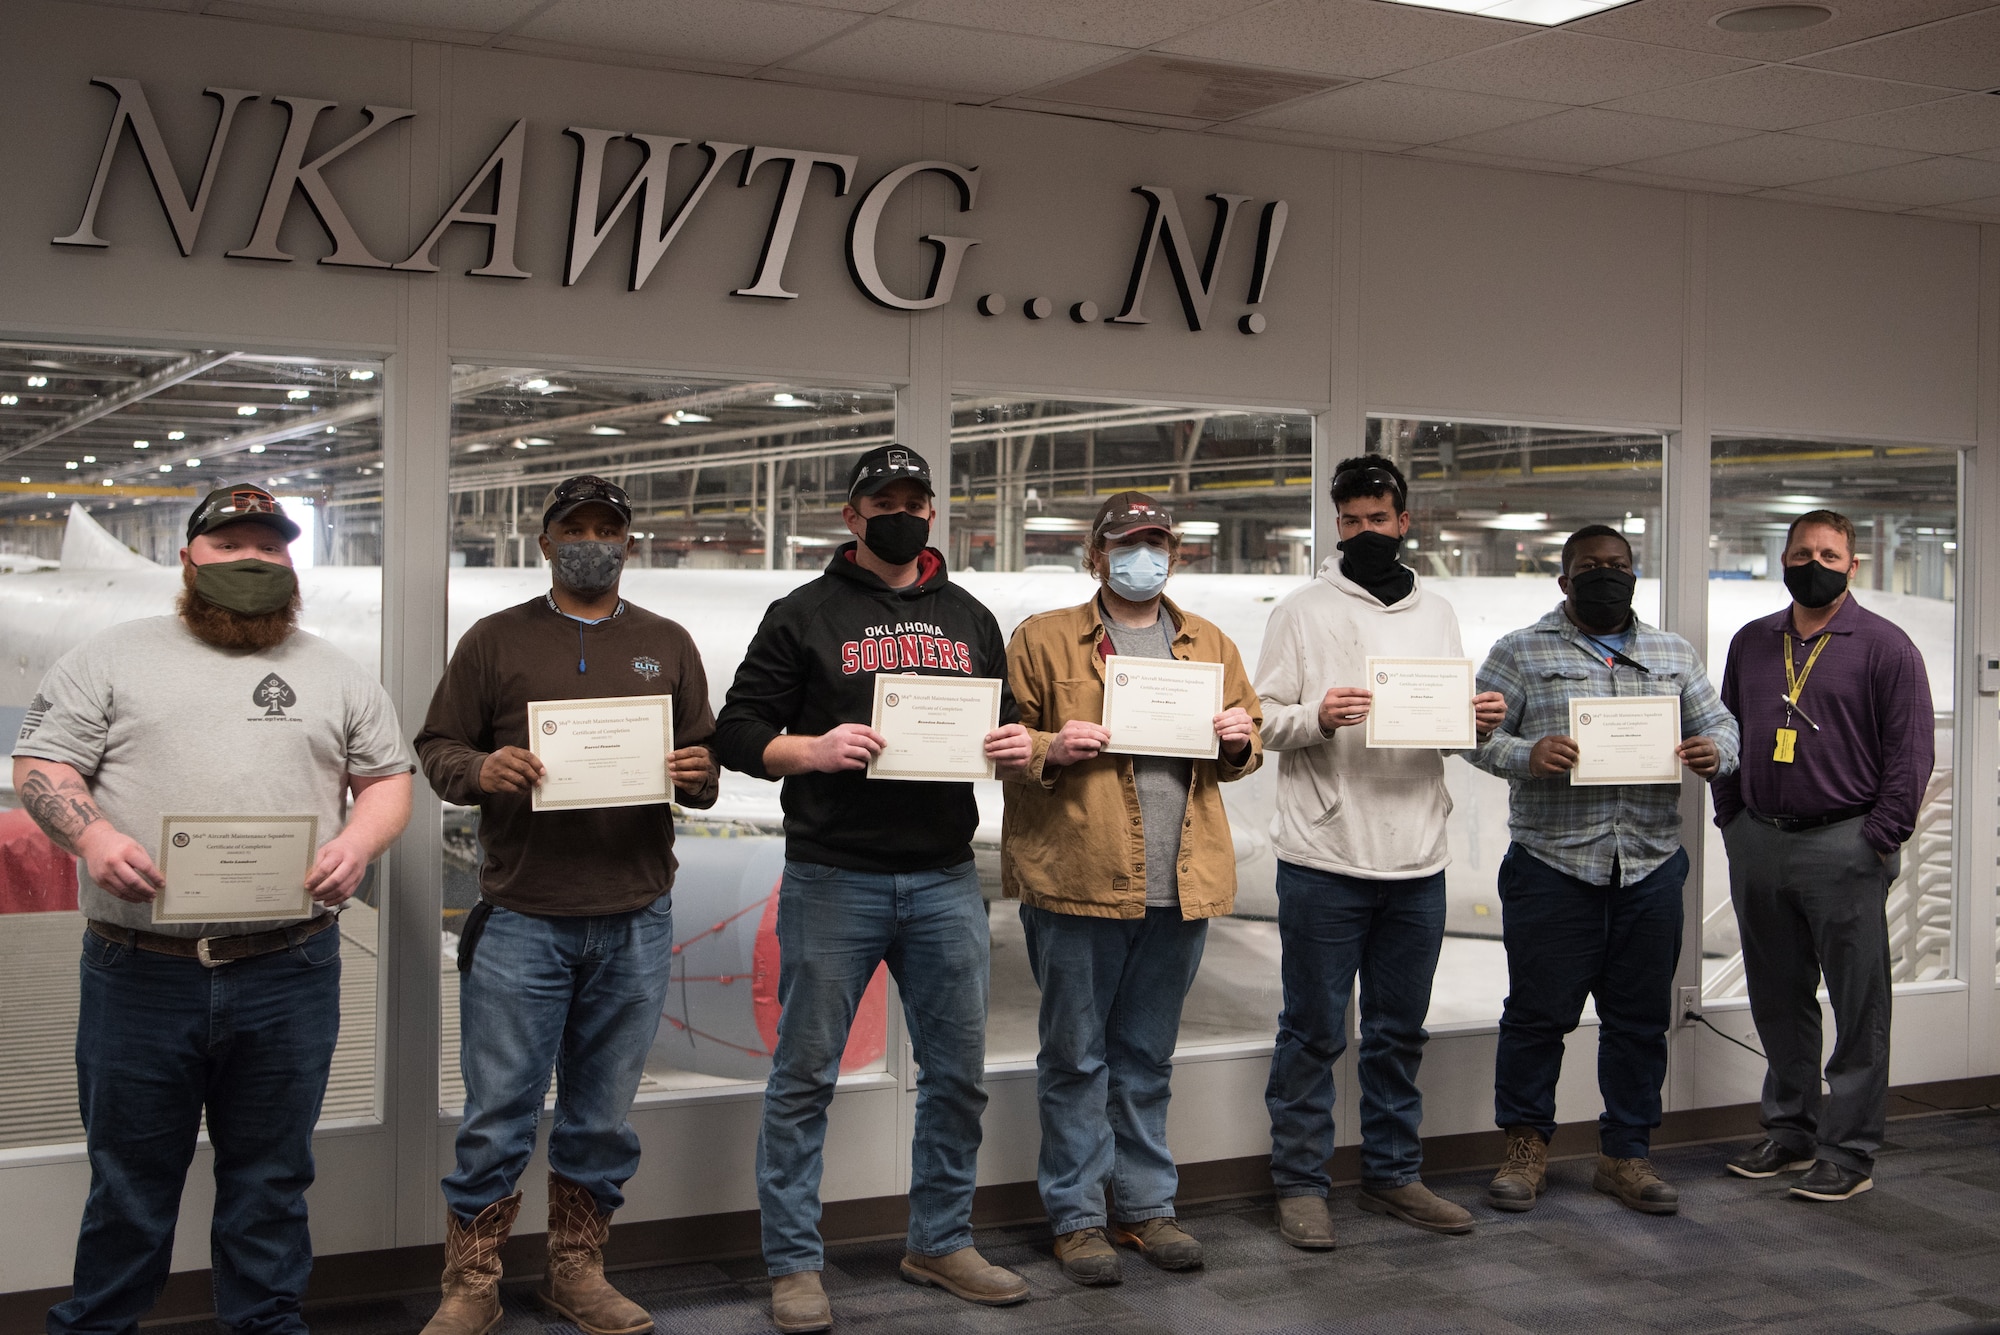 Graduates of the sheet metal vocational program pose for a group photo.